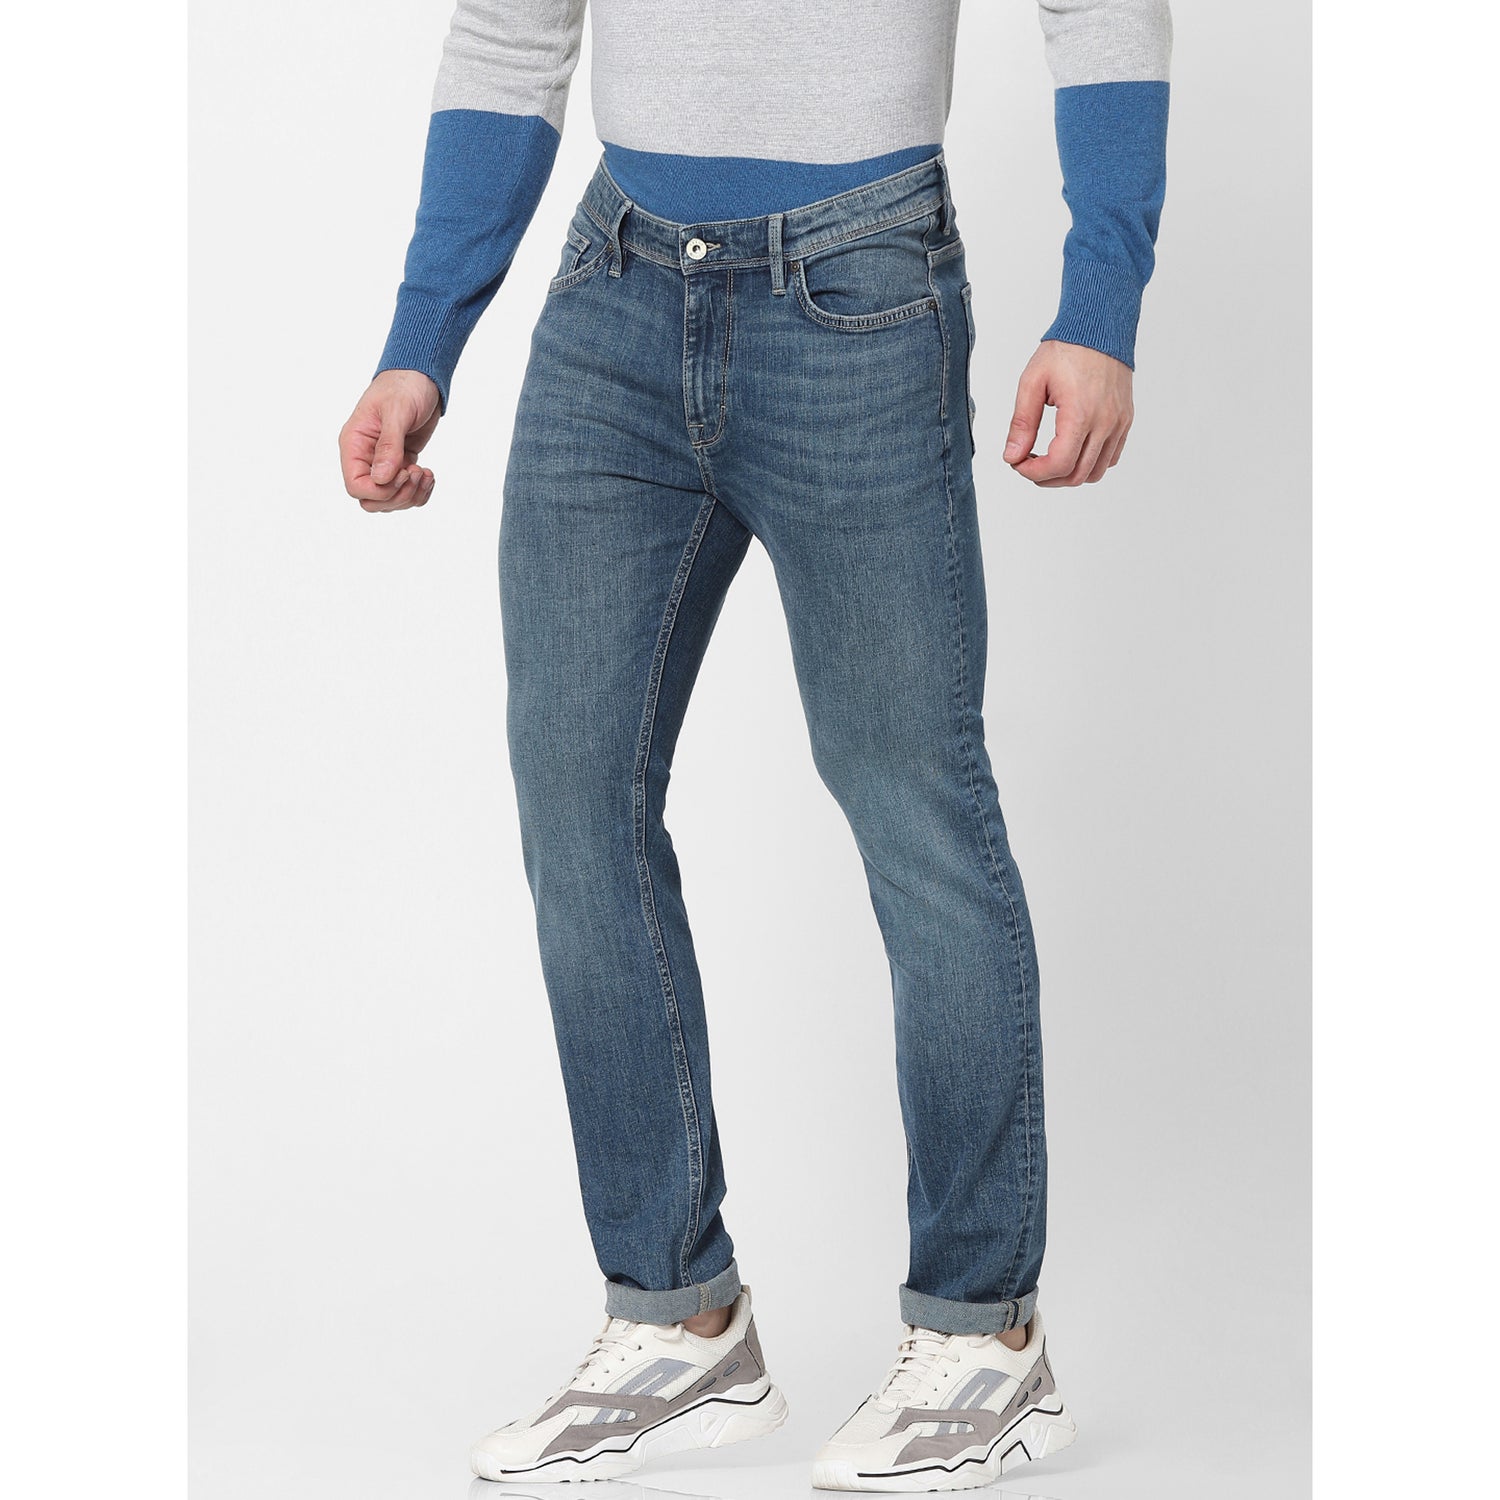 Blue Jean Slim Fit Heavy Fade Stretchable Jeans (VOSLONEIN25)